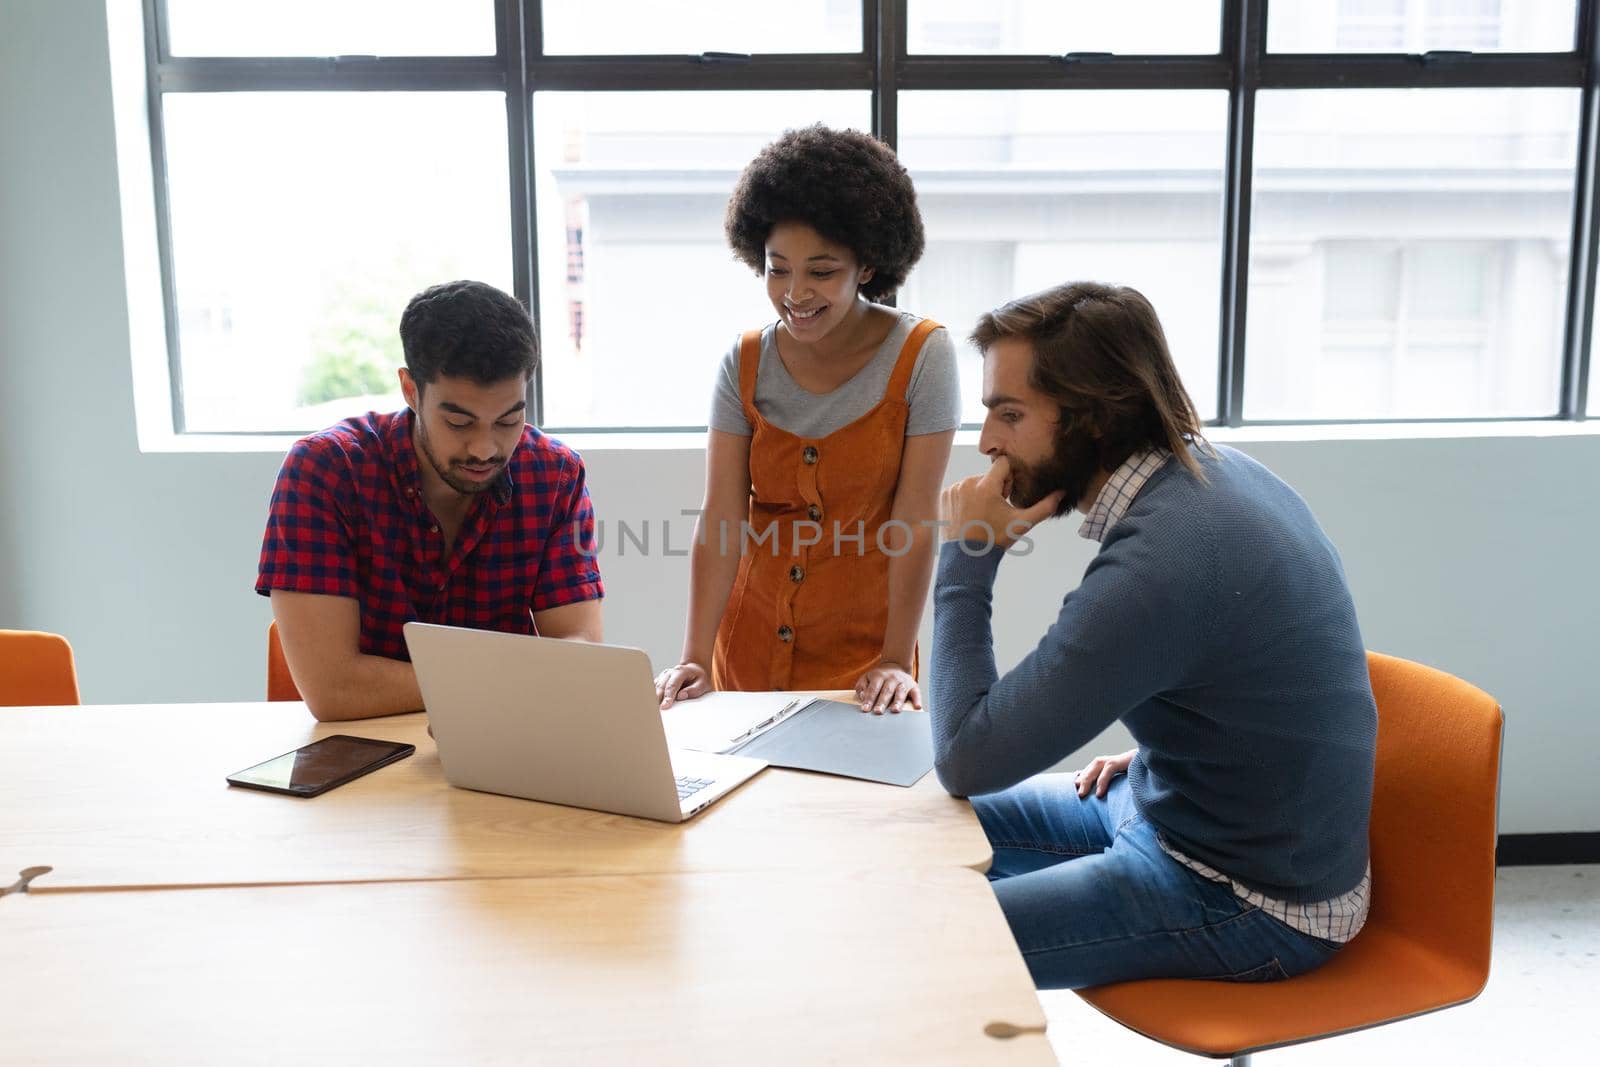 Diverse group of business people working in creative office. group of people discussing work and using laptop. business people and work colleagues at a busy creative office.